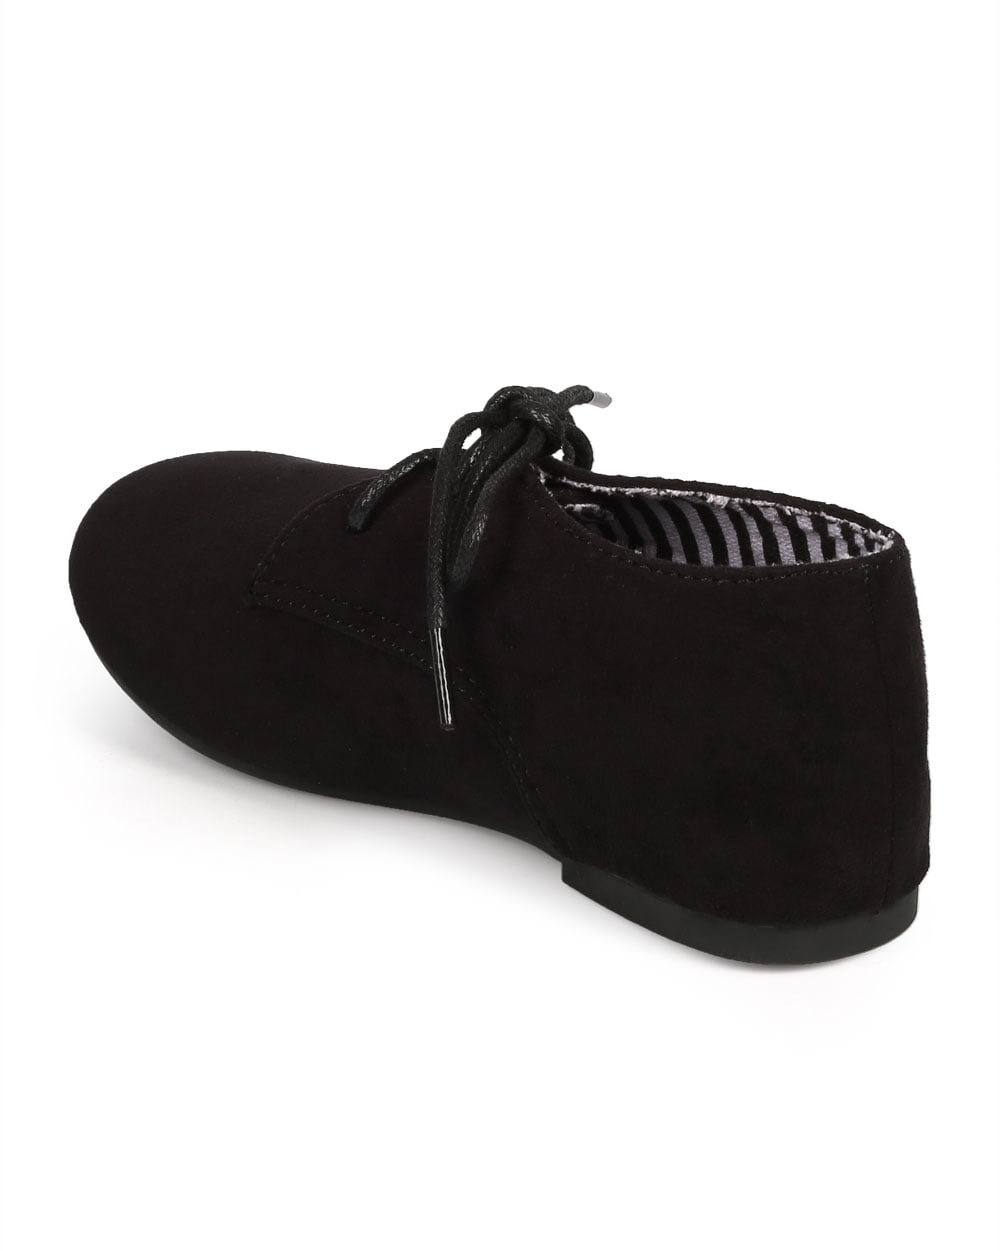 Black Toddler//Little Girl//Big Girl Size: Little Kid 12 Suede Round Toe Lace Up Classic Ankle Oxford Flat DG66